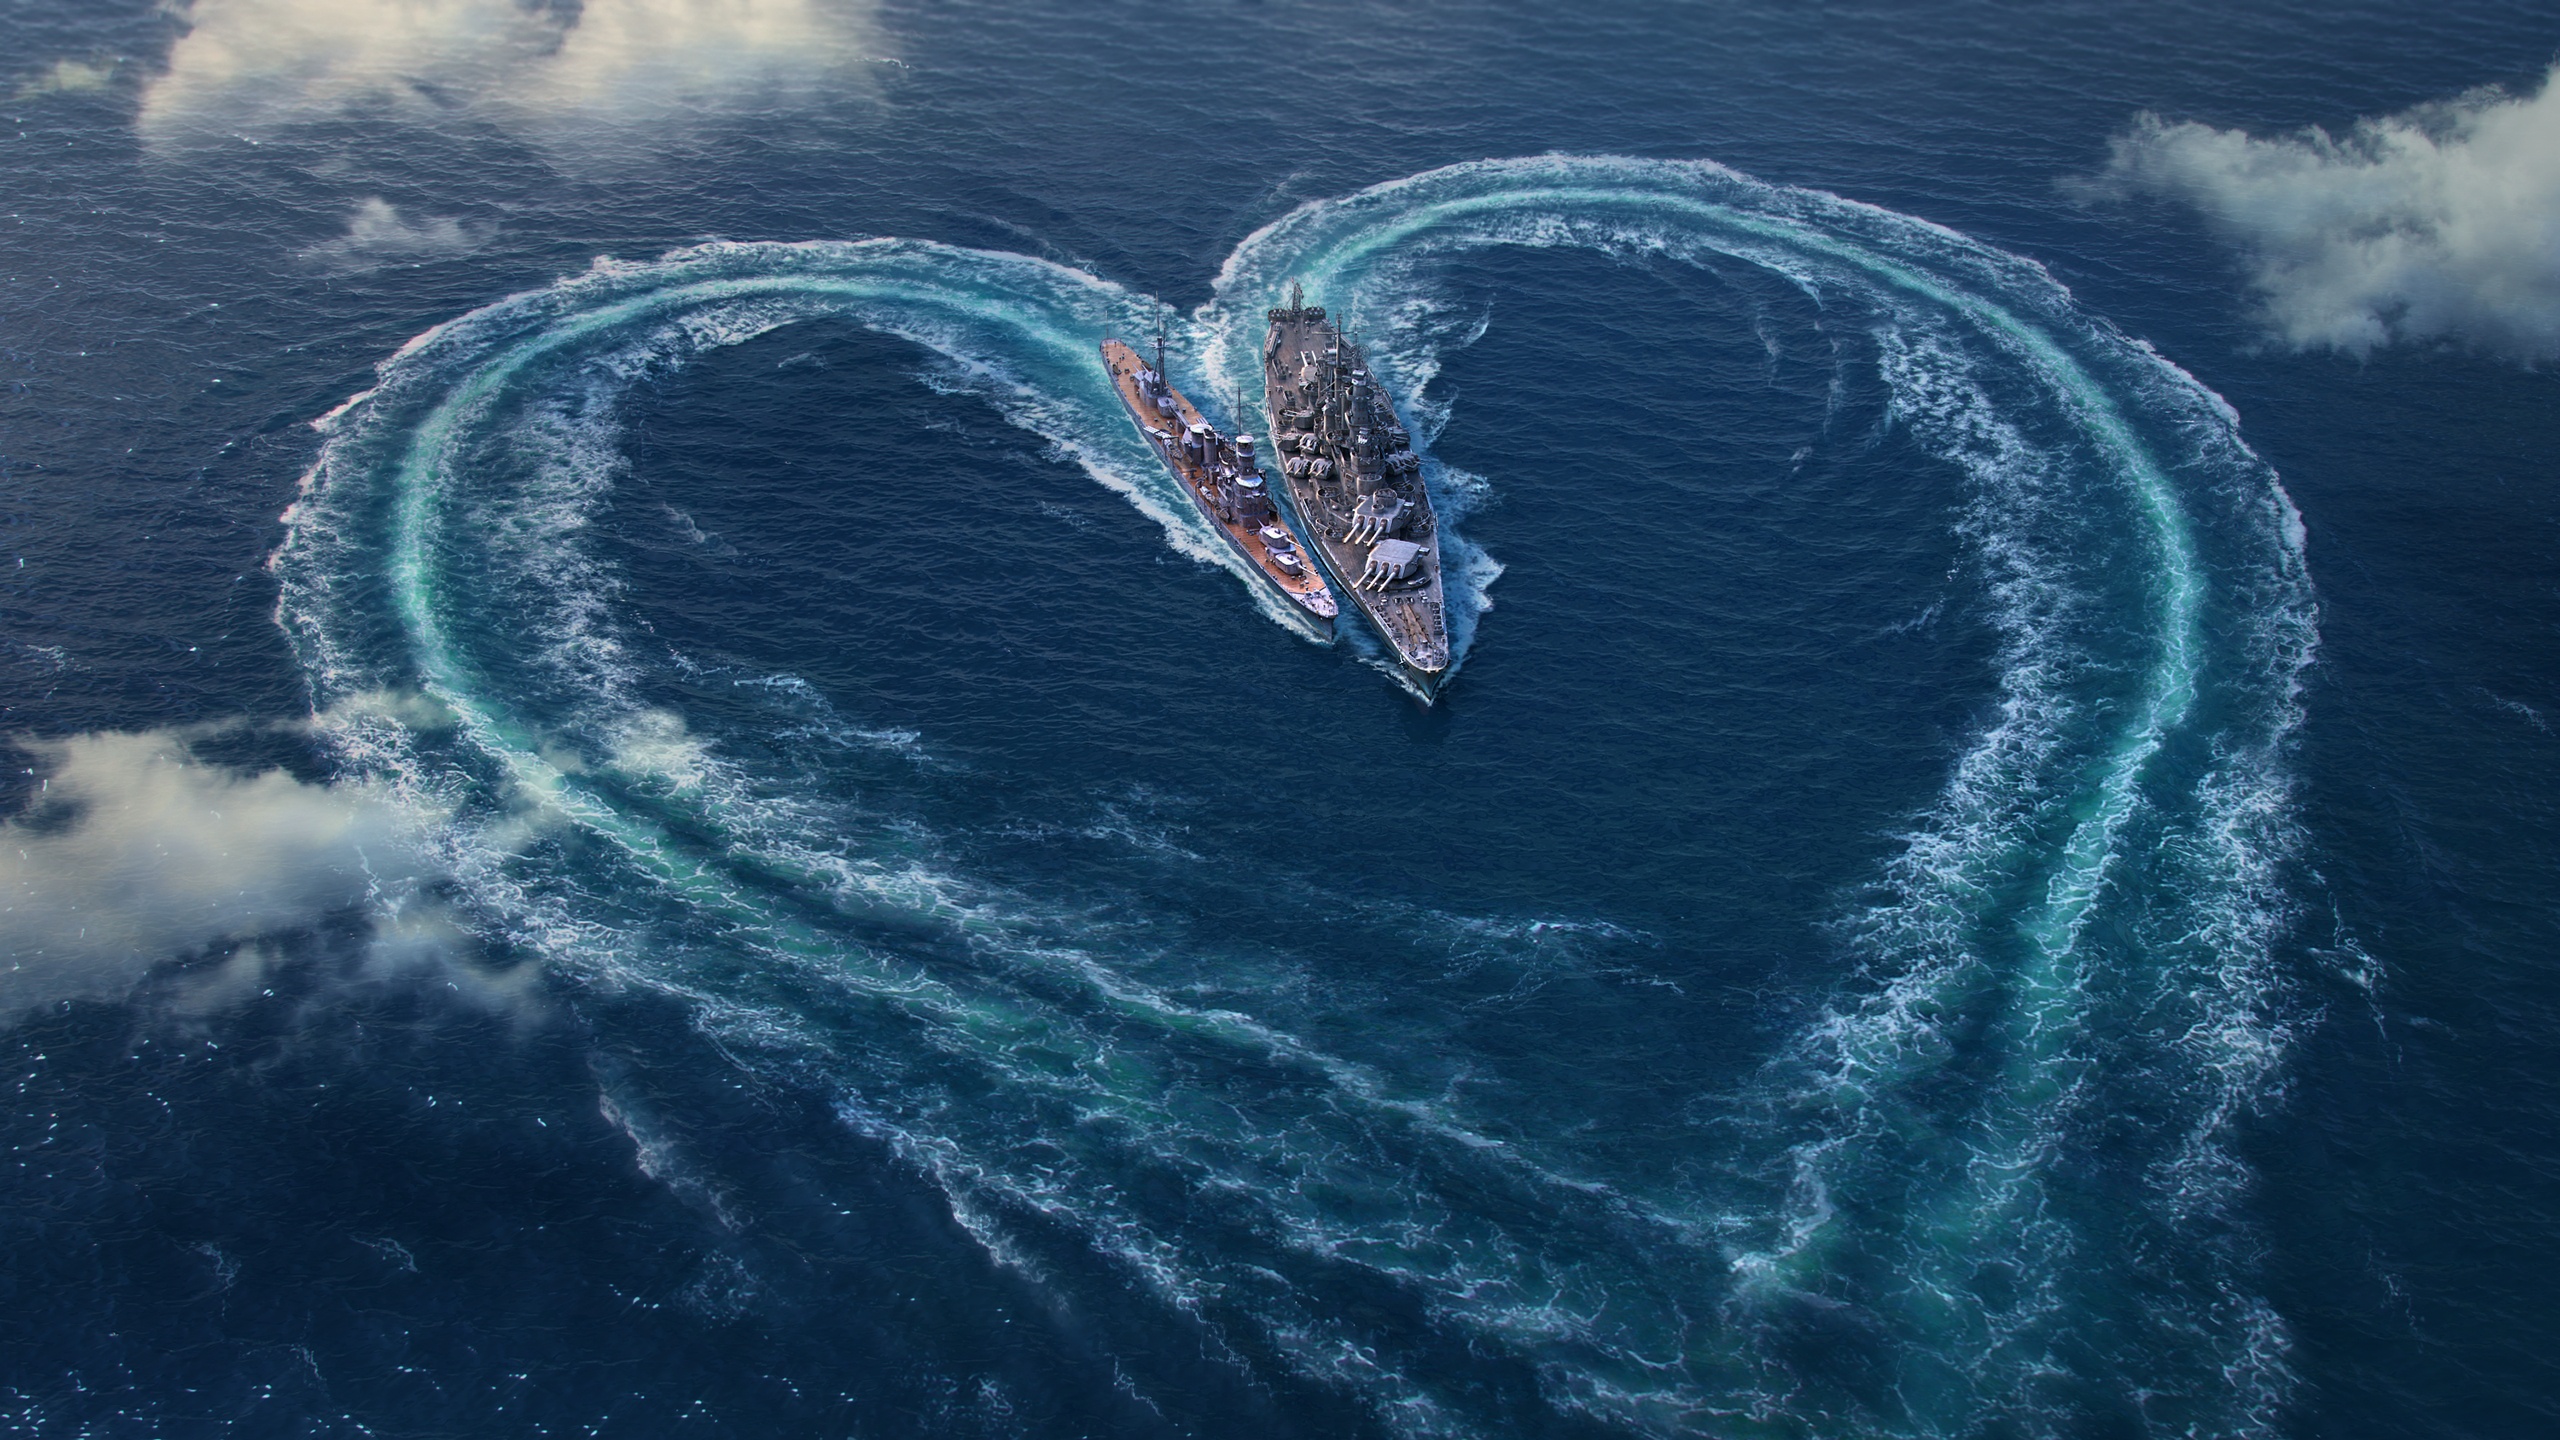 World of Warships Valentines Day Special151936981 - World of Warships Valentines Day Special - World, Warships, Valentini, Valentines, Special, Day